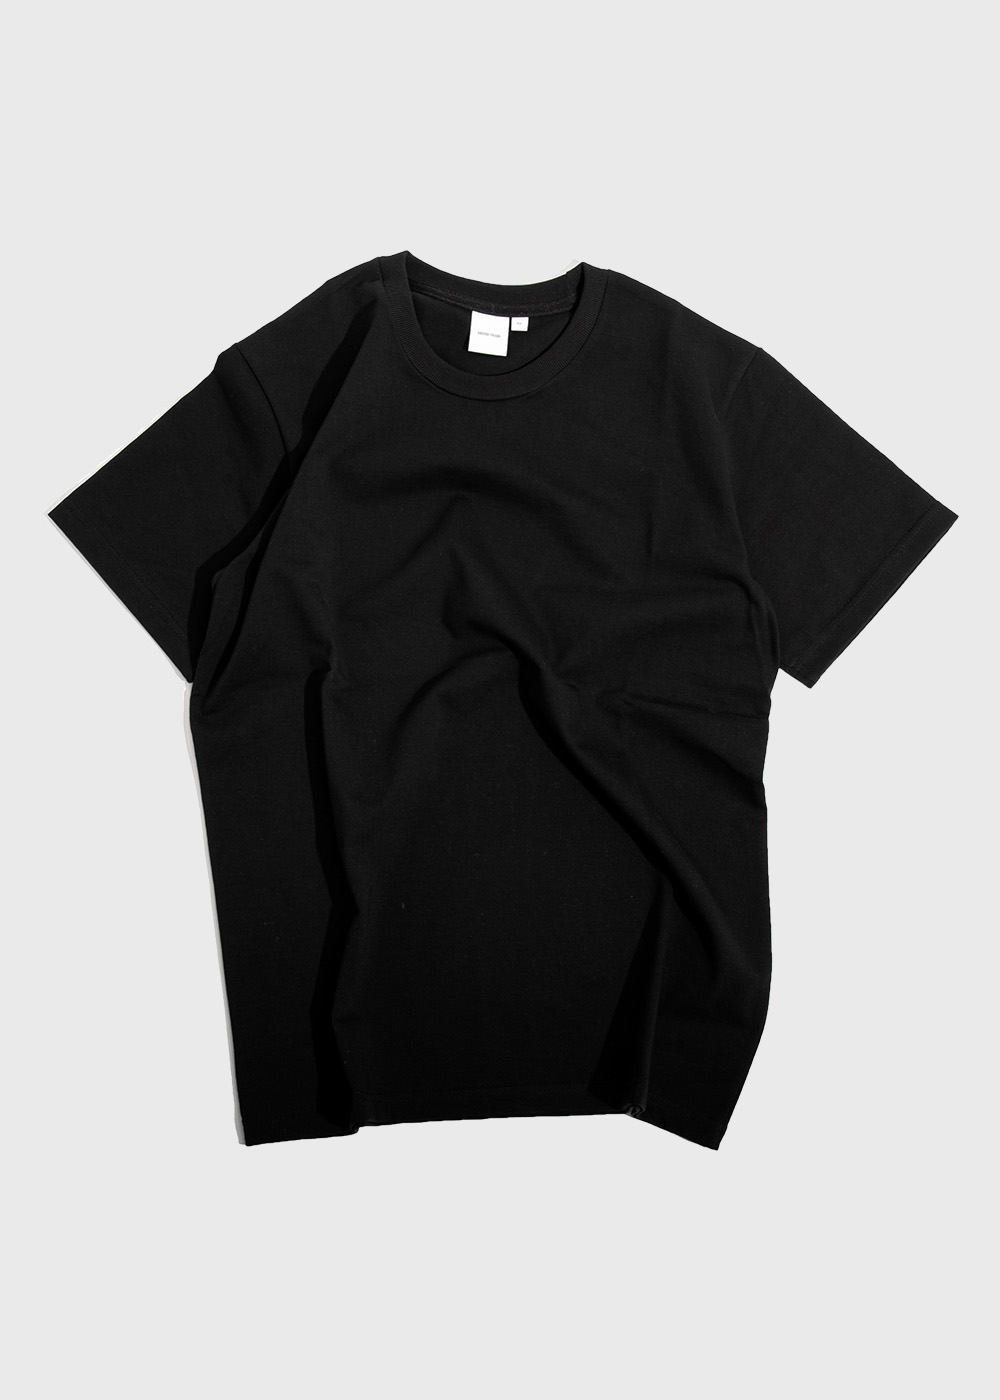 A. Silked Combed Cotton 100% 20/2 Single T-shirt _ black